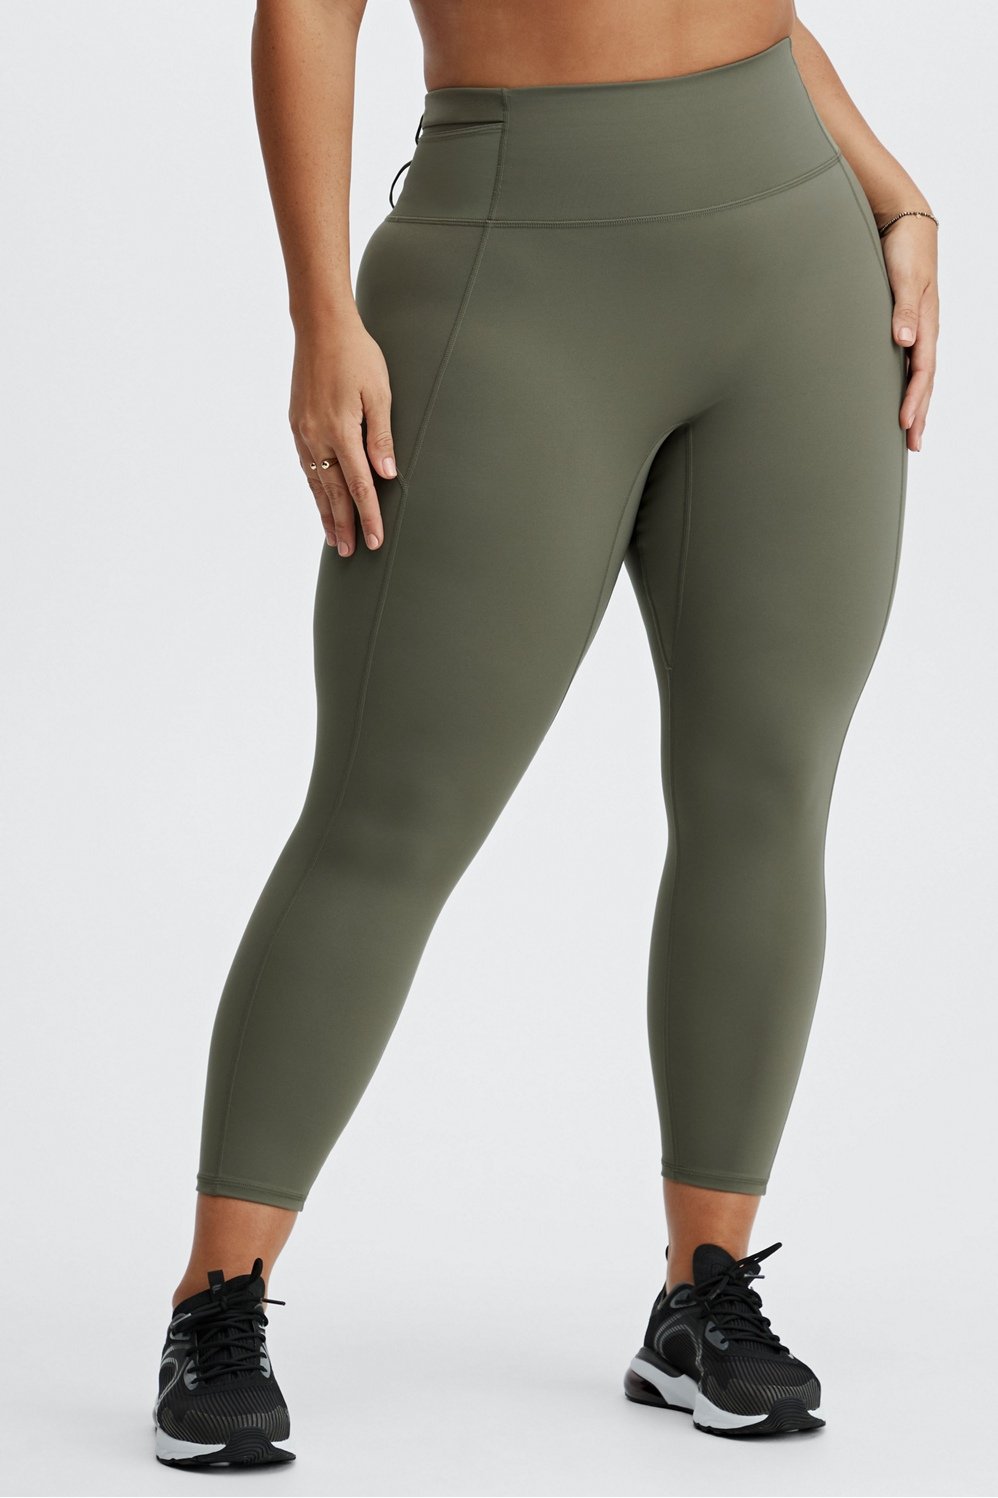 Women's Everyday Soft Ultra High-Rise Pocketed Leggings 27 - All in Motion  Green XXL 1 ct